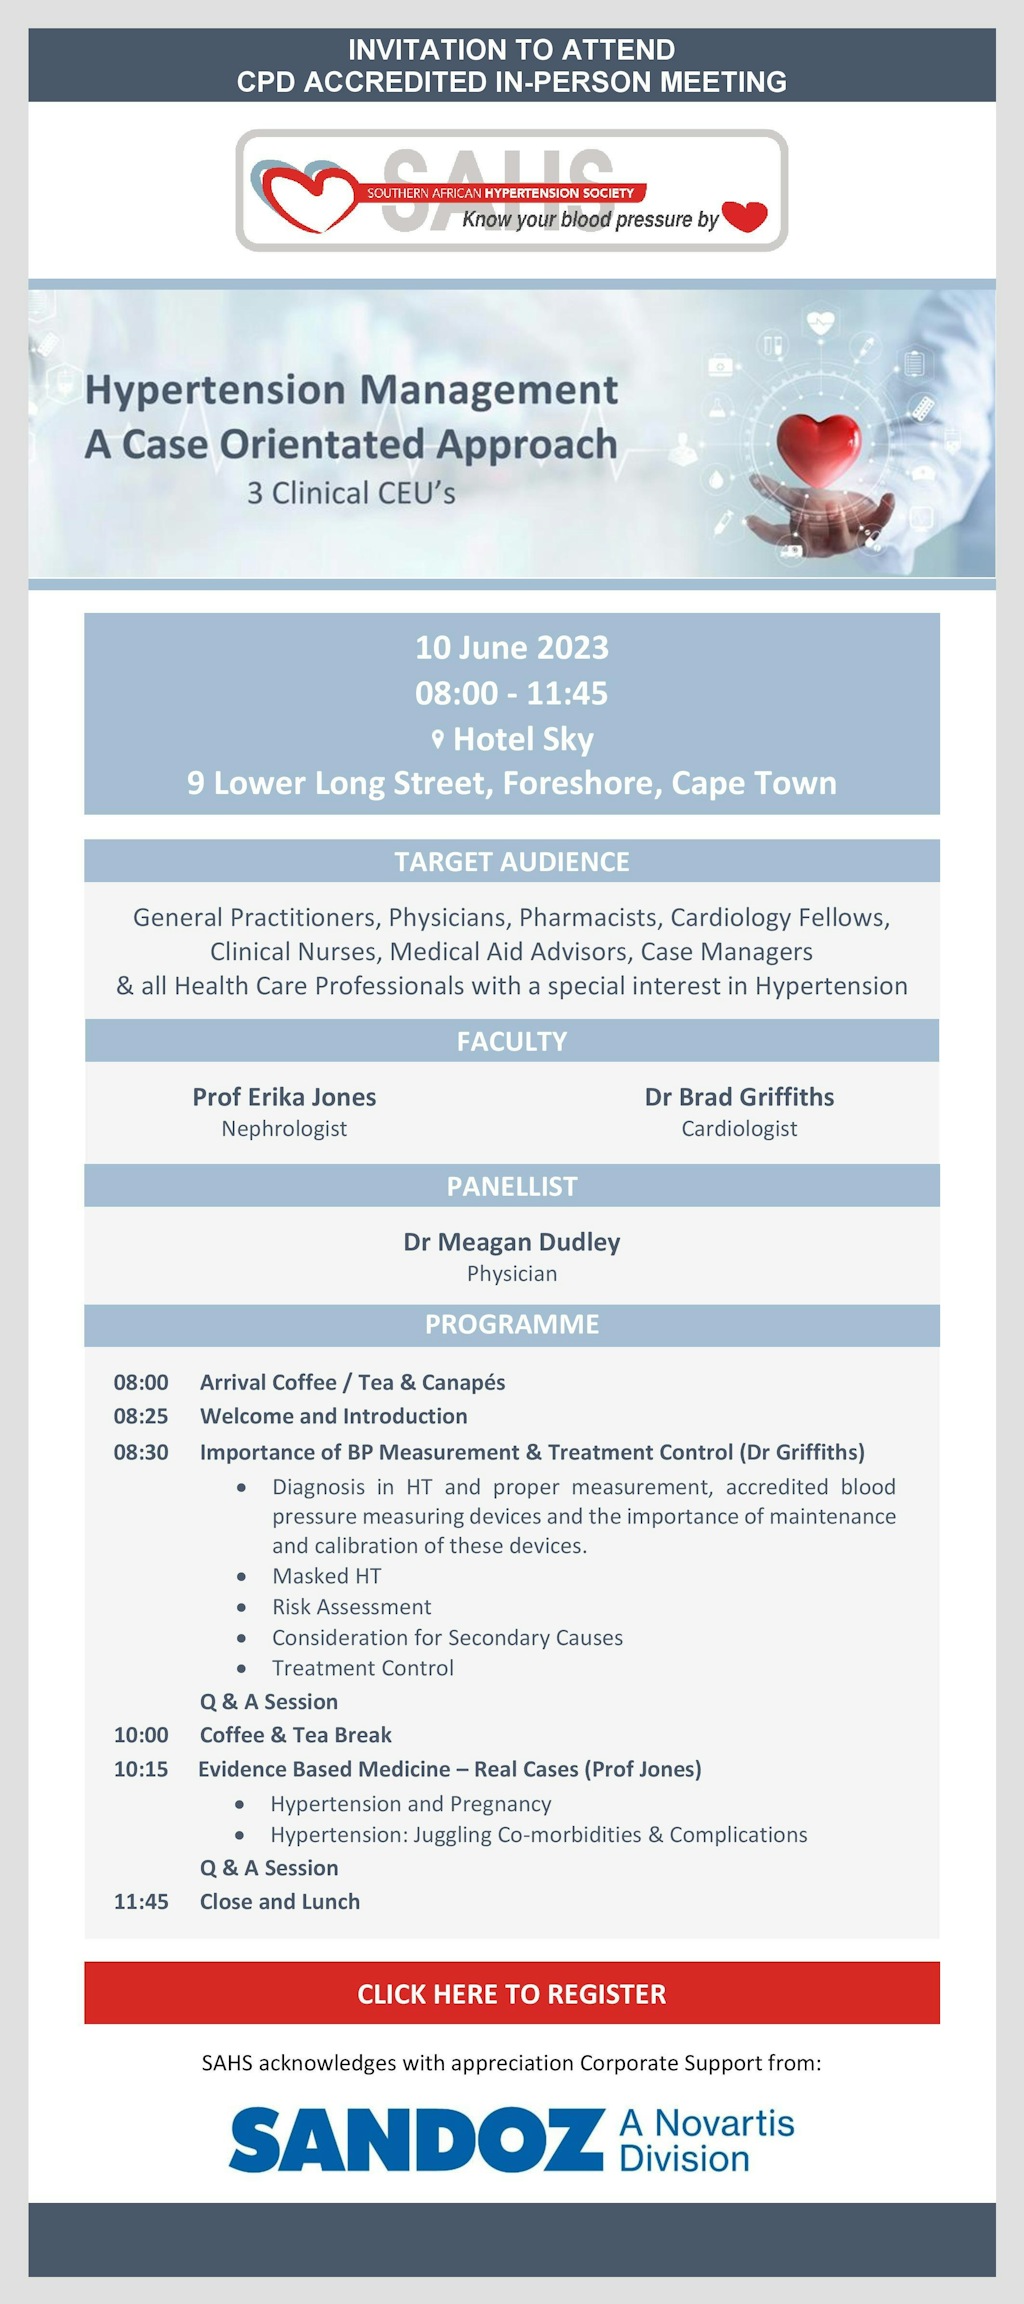 Invitation To Attend Sahs Hypertension Management Meeting Cape Town 10 June 2023 Page 001